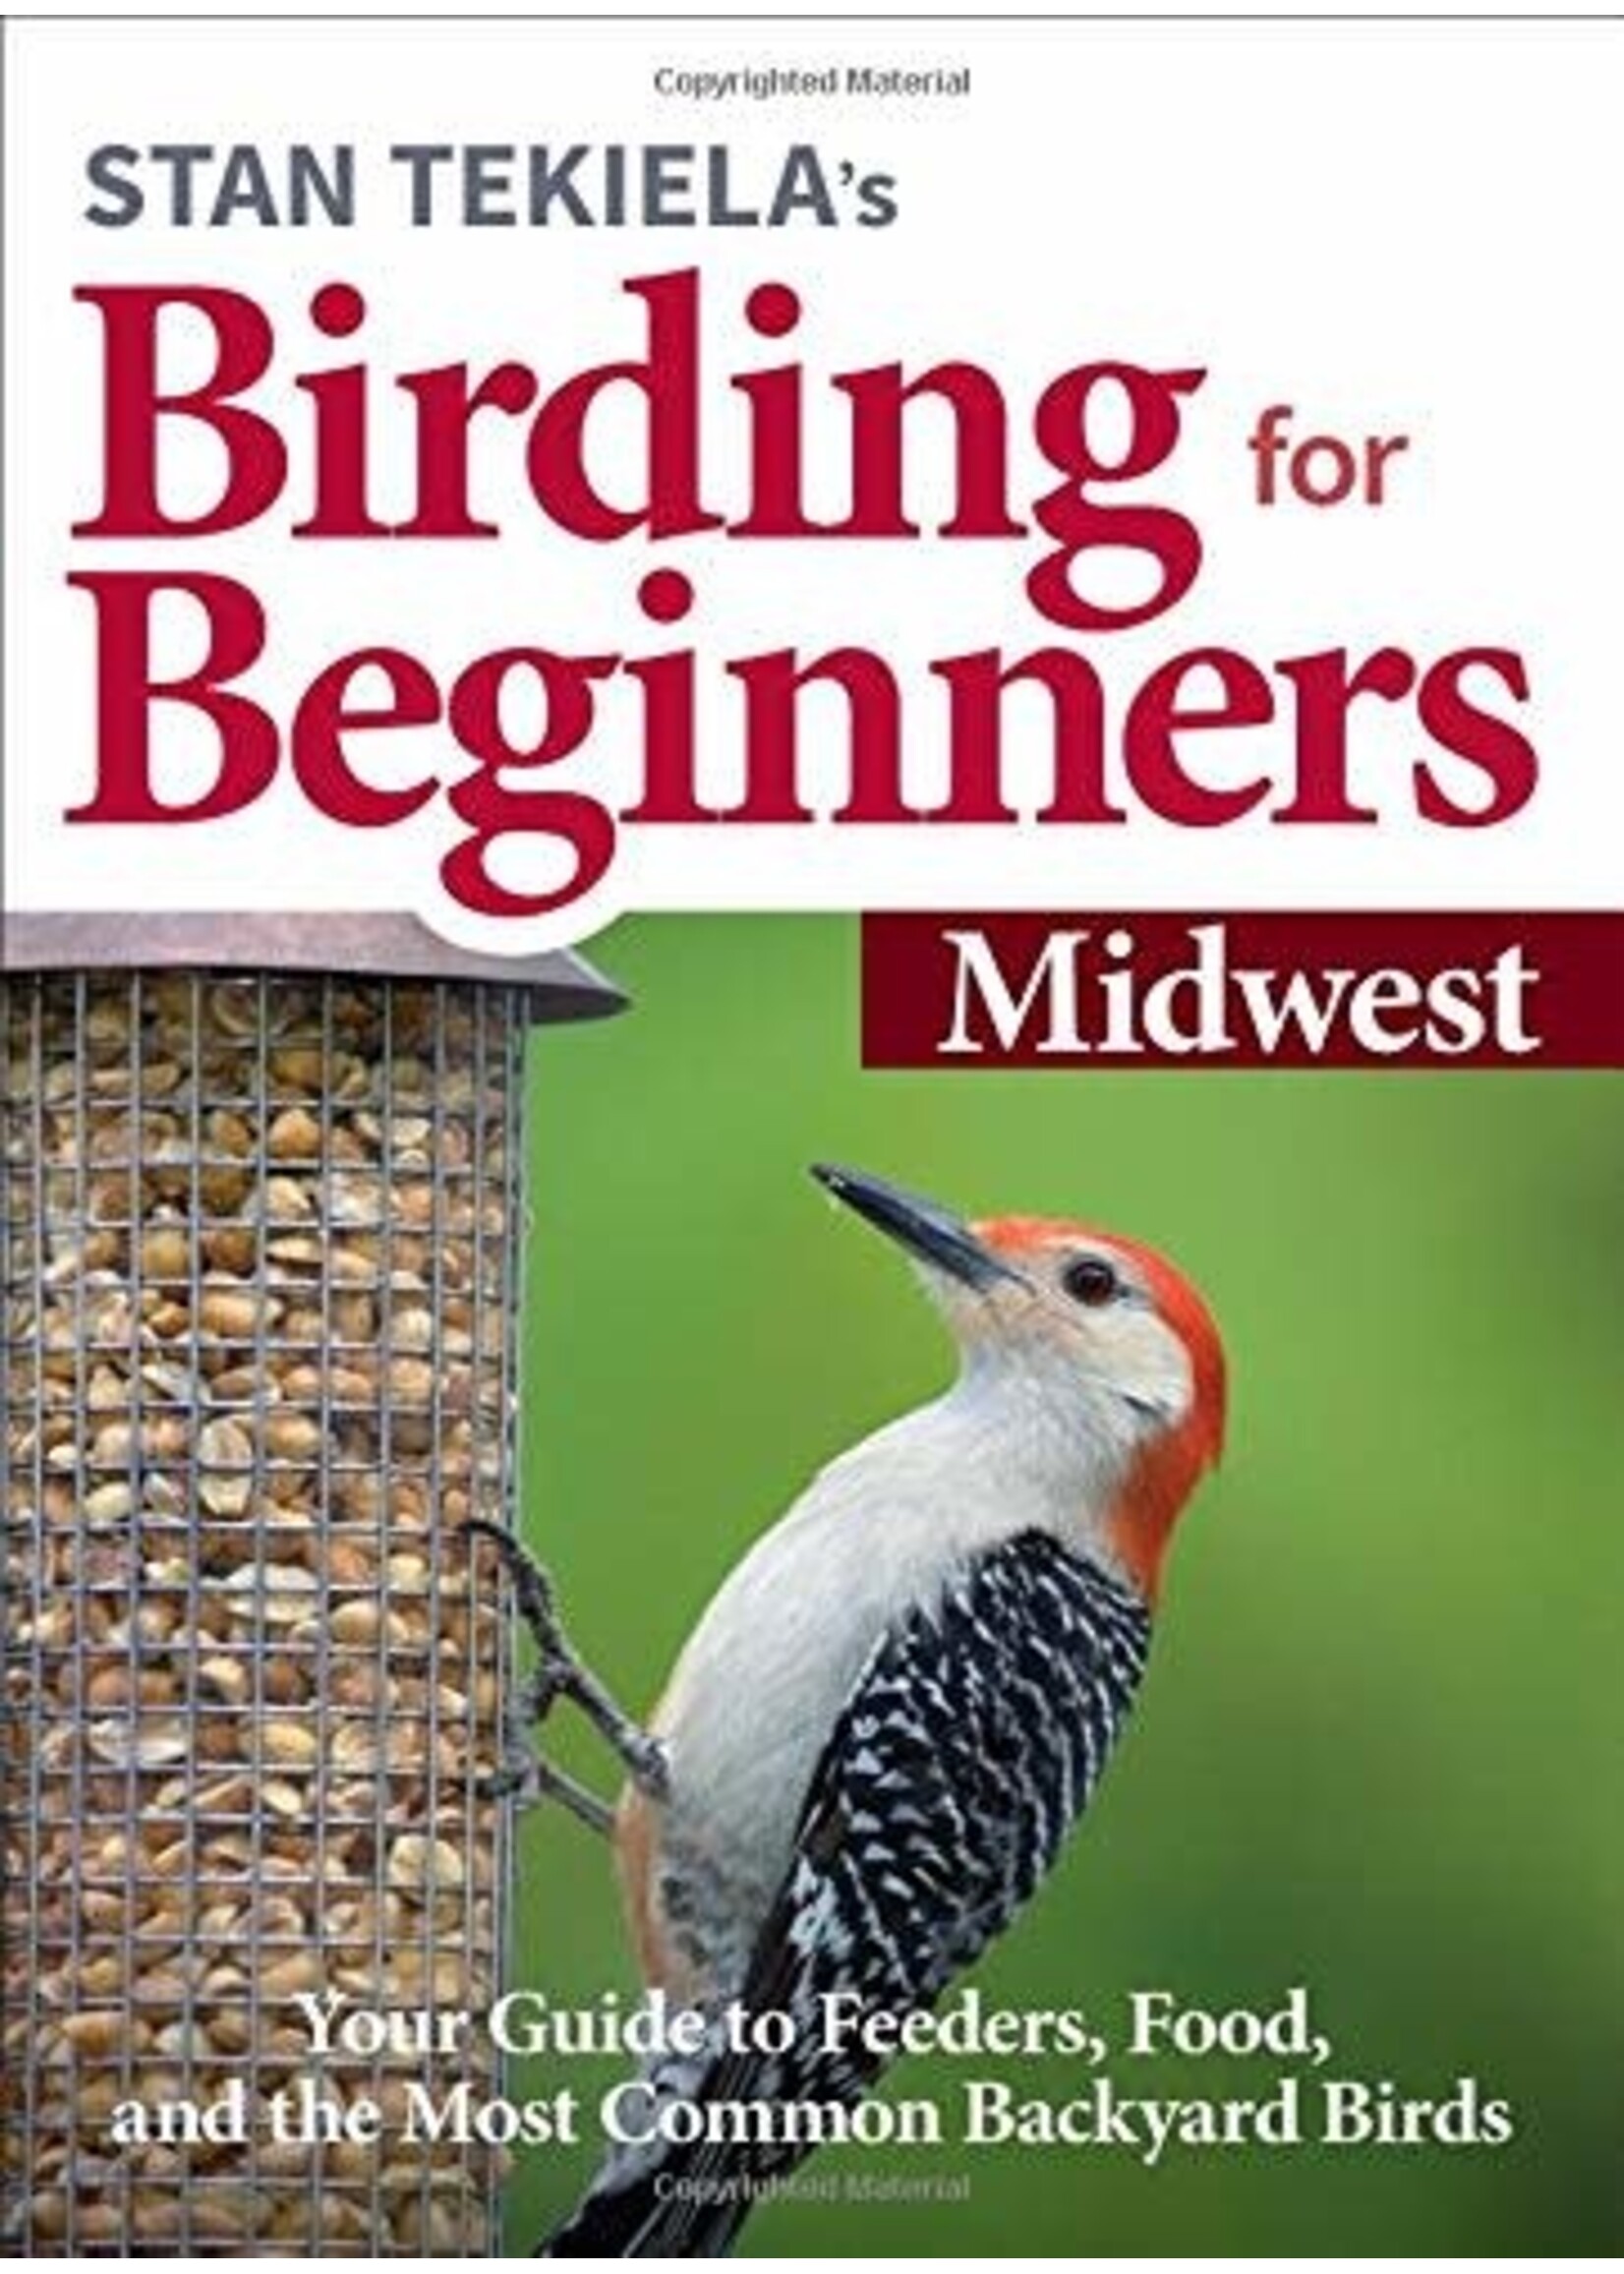 Birding For Beginners: Midwest